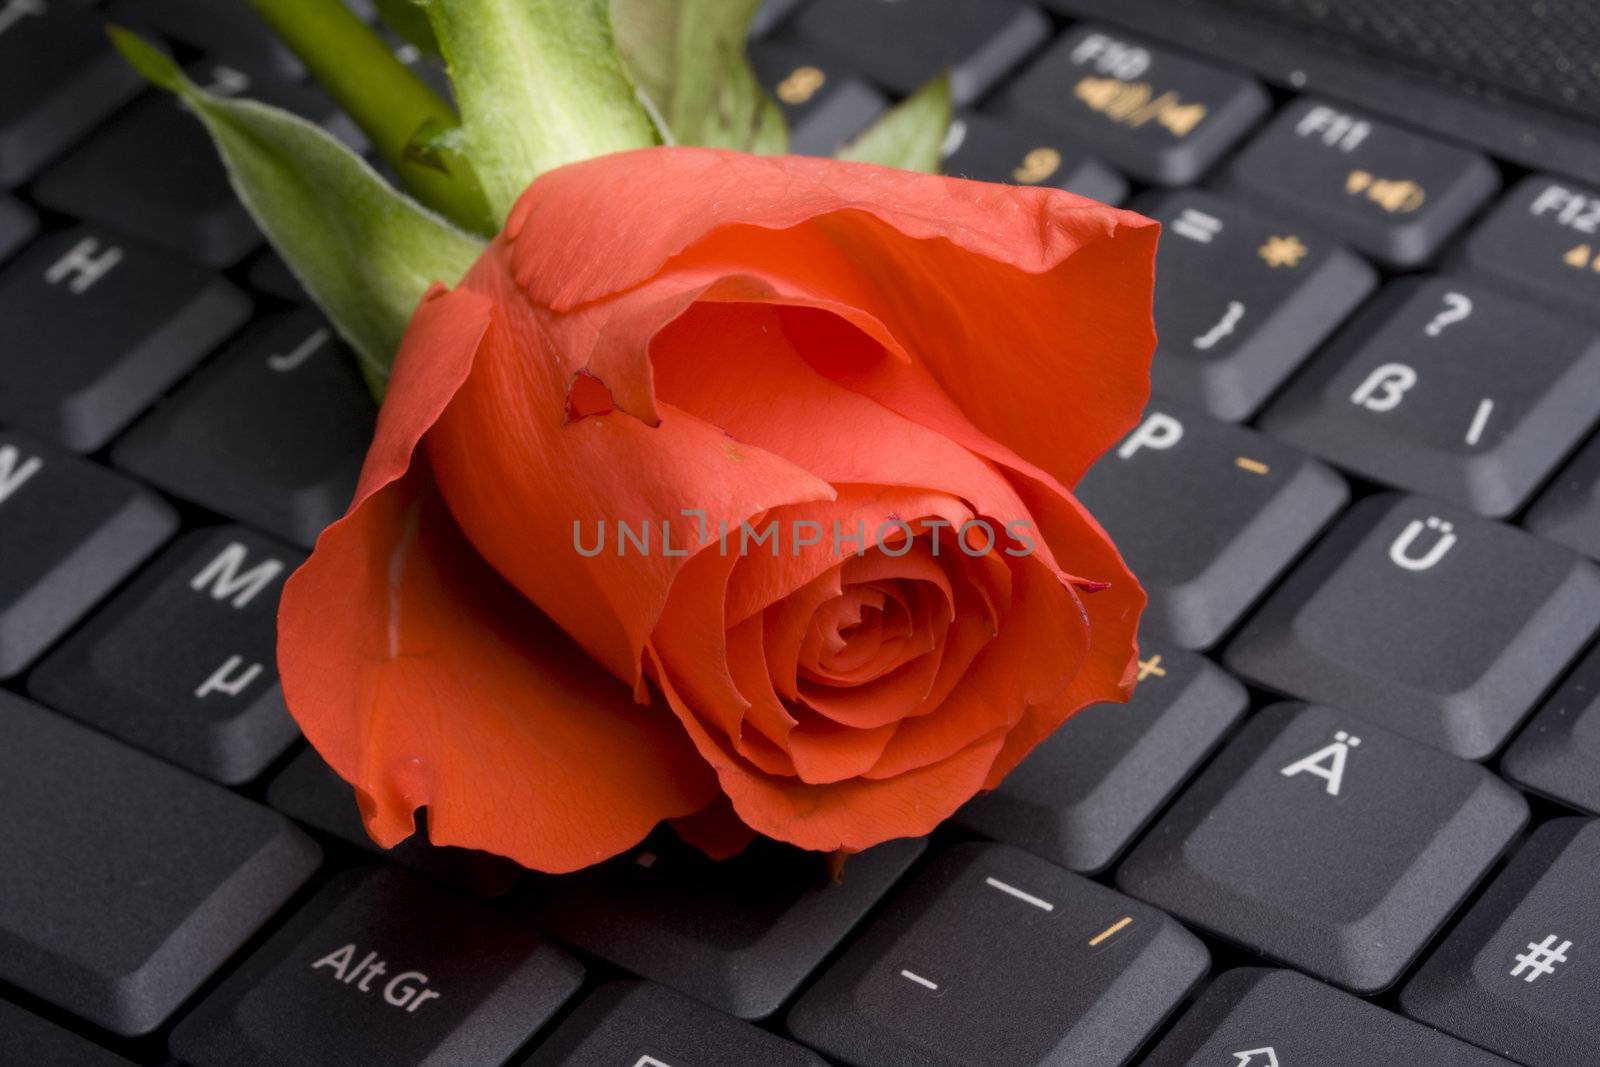 red rose on a notebook computer keyboard by bernjuer